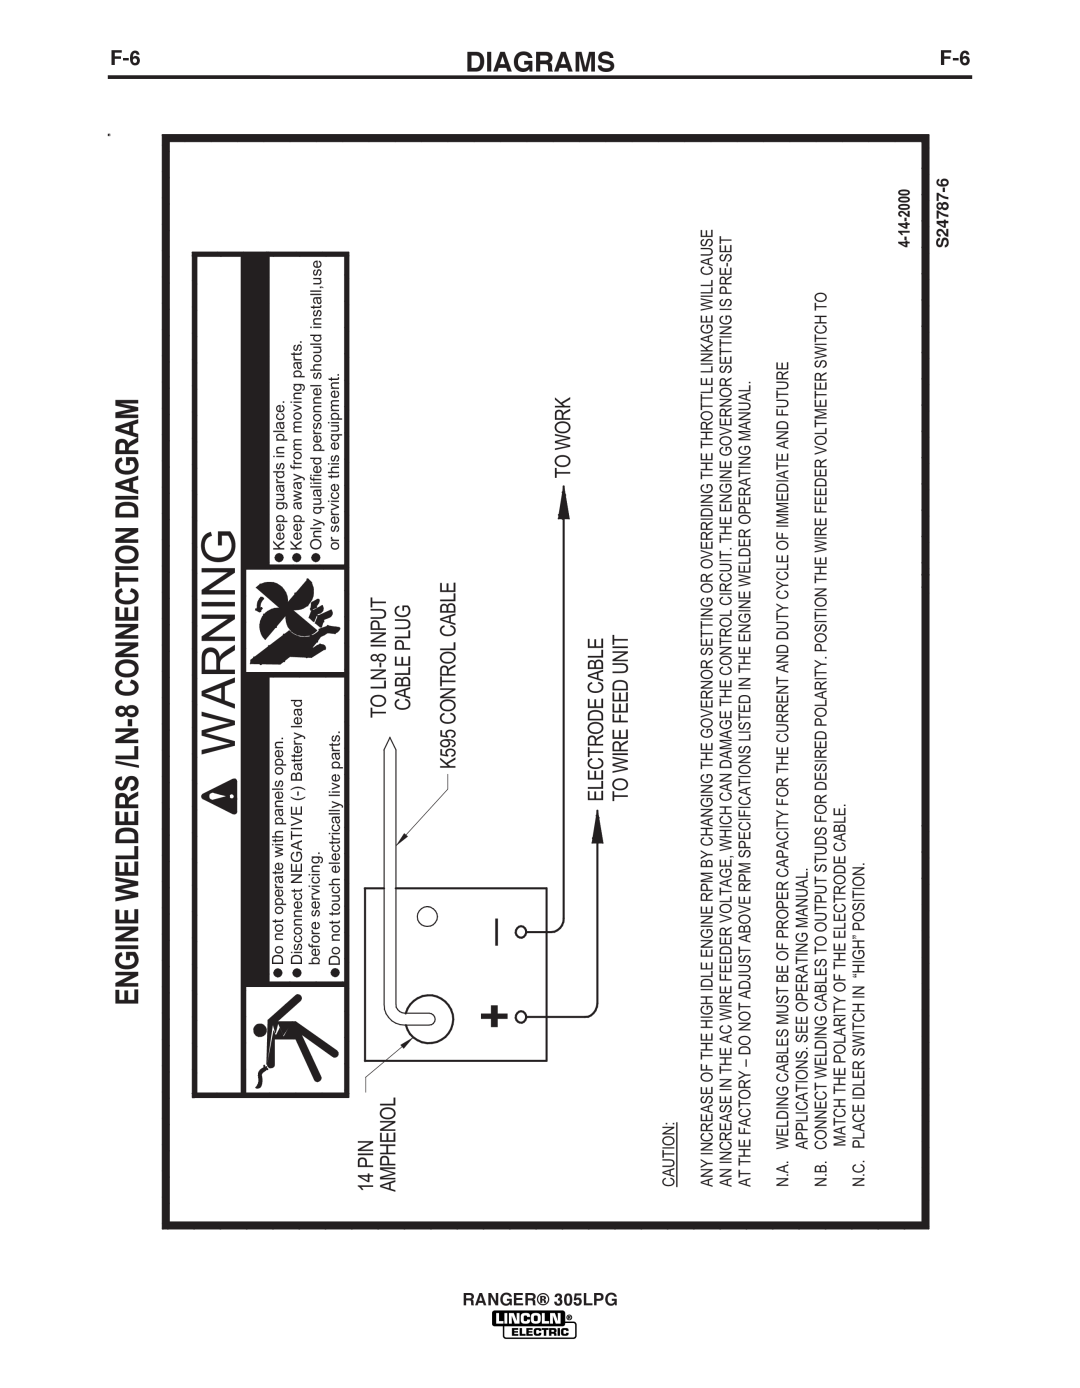 Lincoln Electric IM10043-A ENGINE WELDERS /LN-8 CONNECTION DIAGRAM, Diagrams, ELECTRIC SHOCK can kill, To Wire Feed Unit 